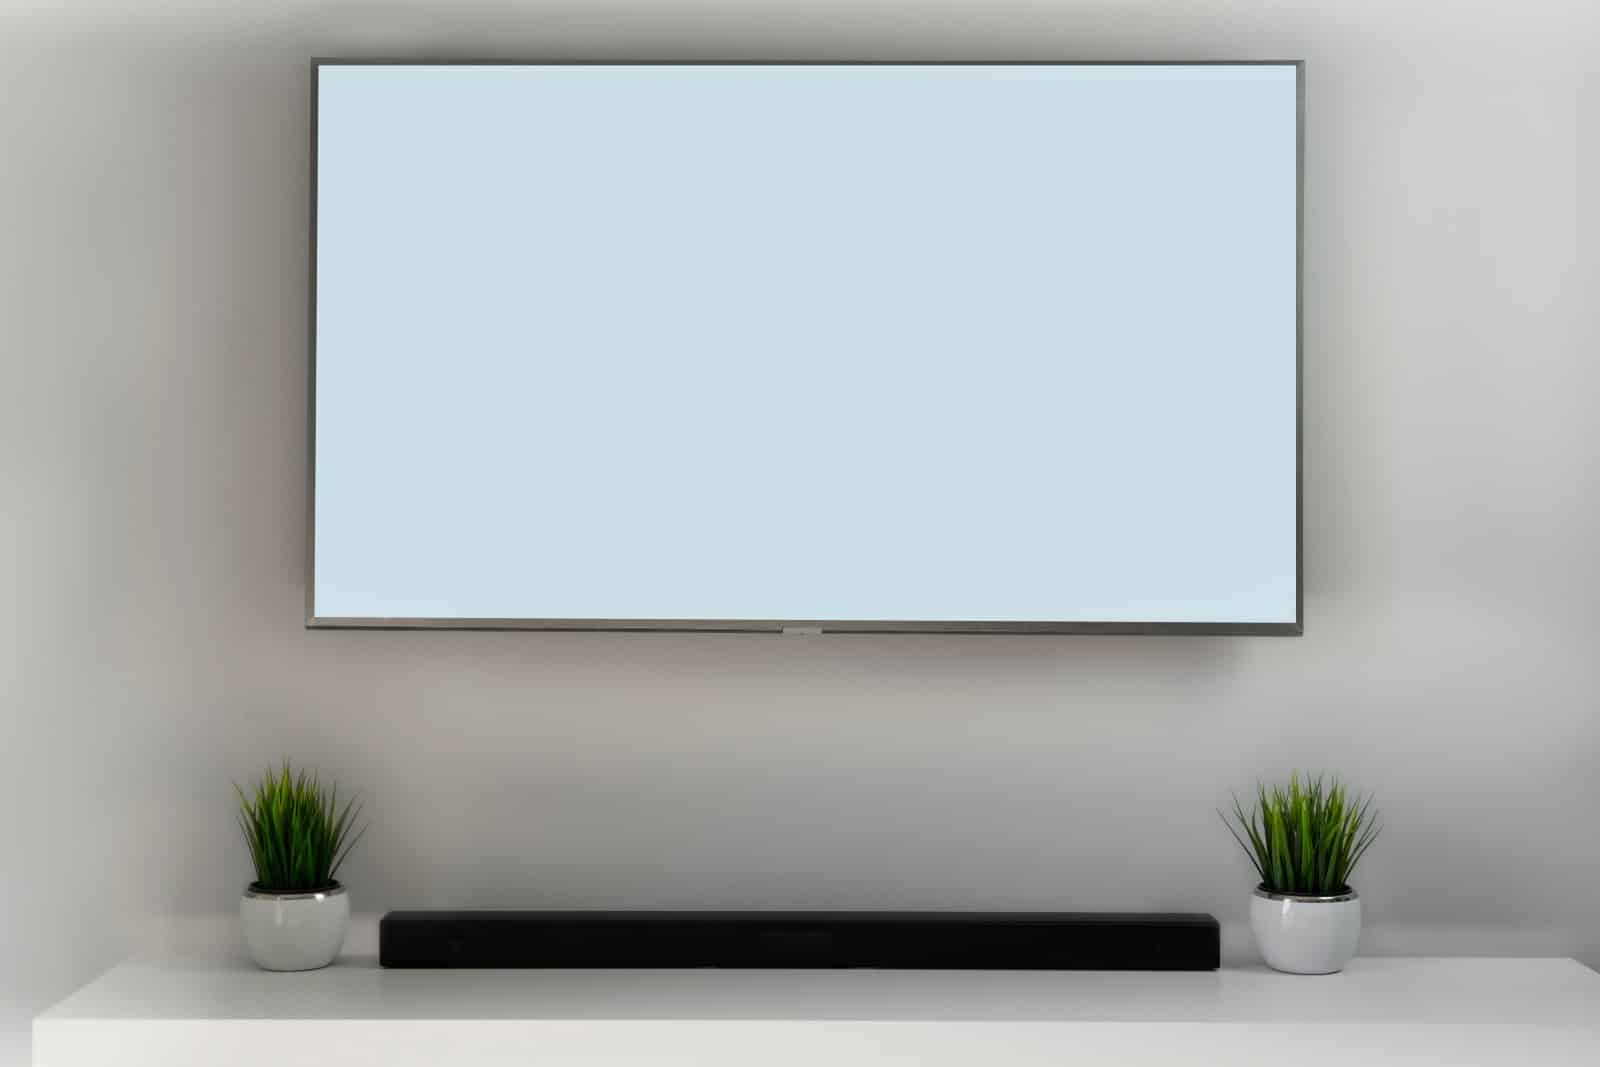 flat screen TV and sound bar concept.